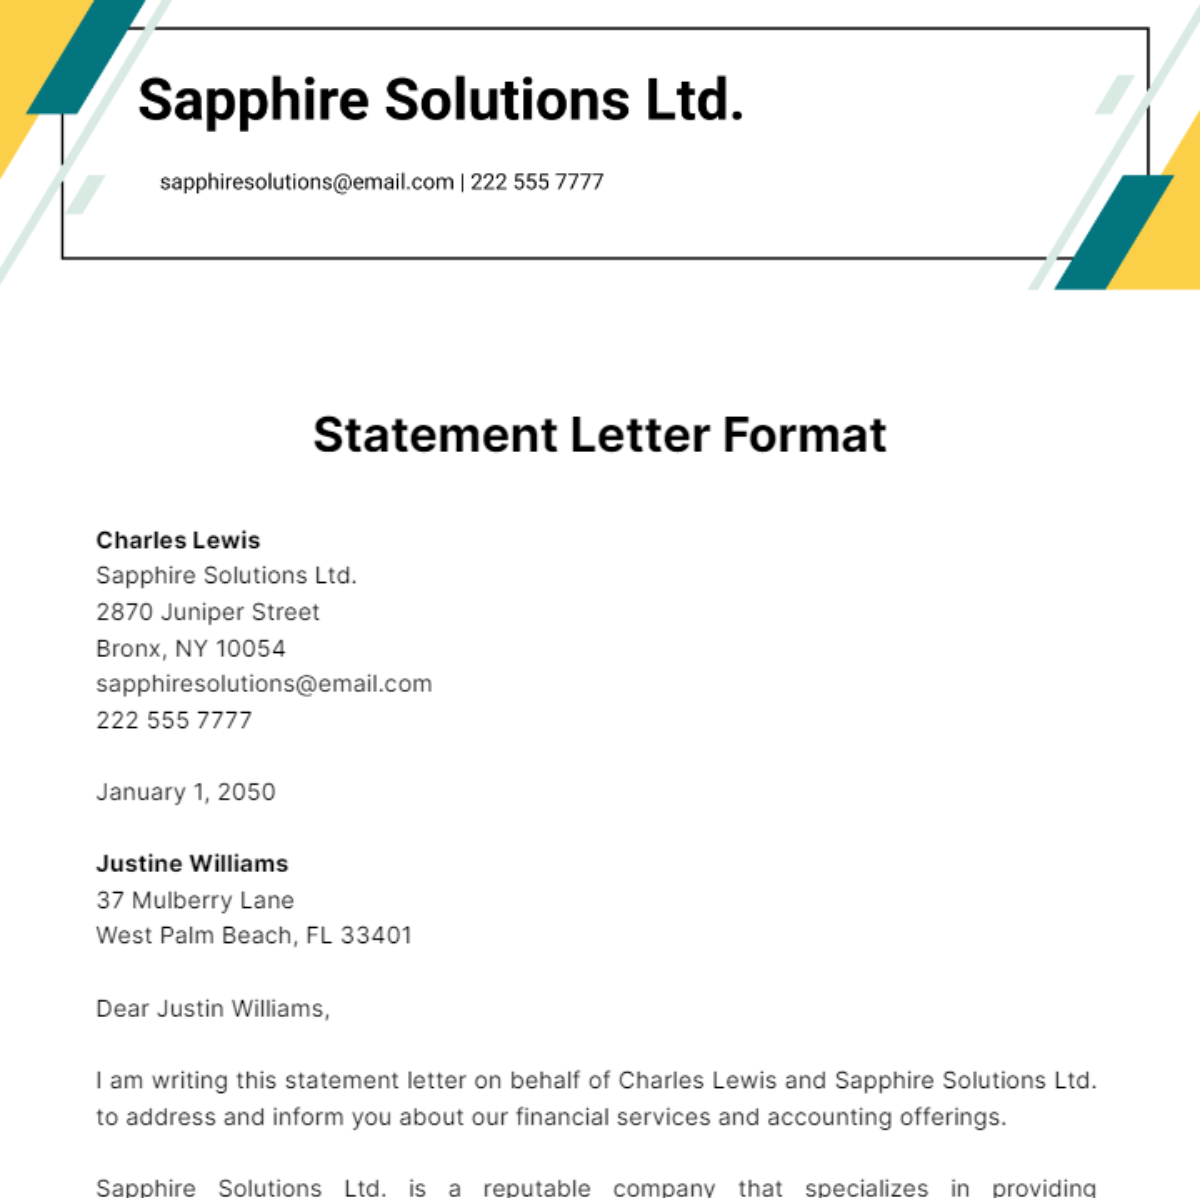 Statement Letter Format Template